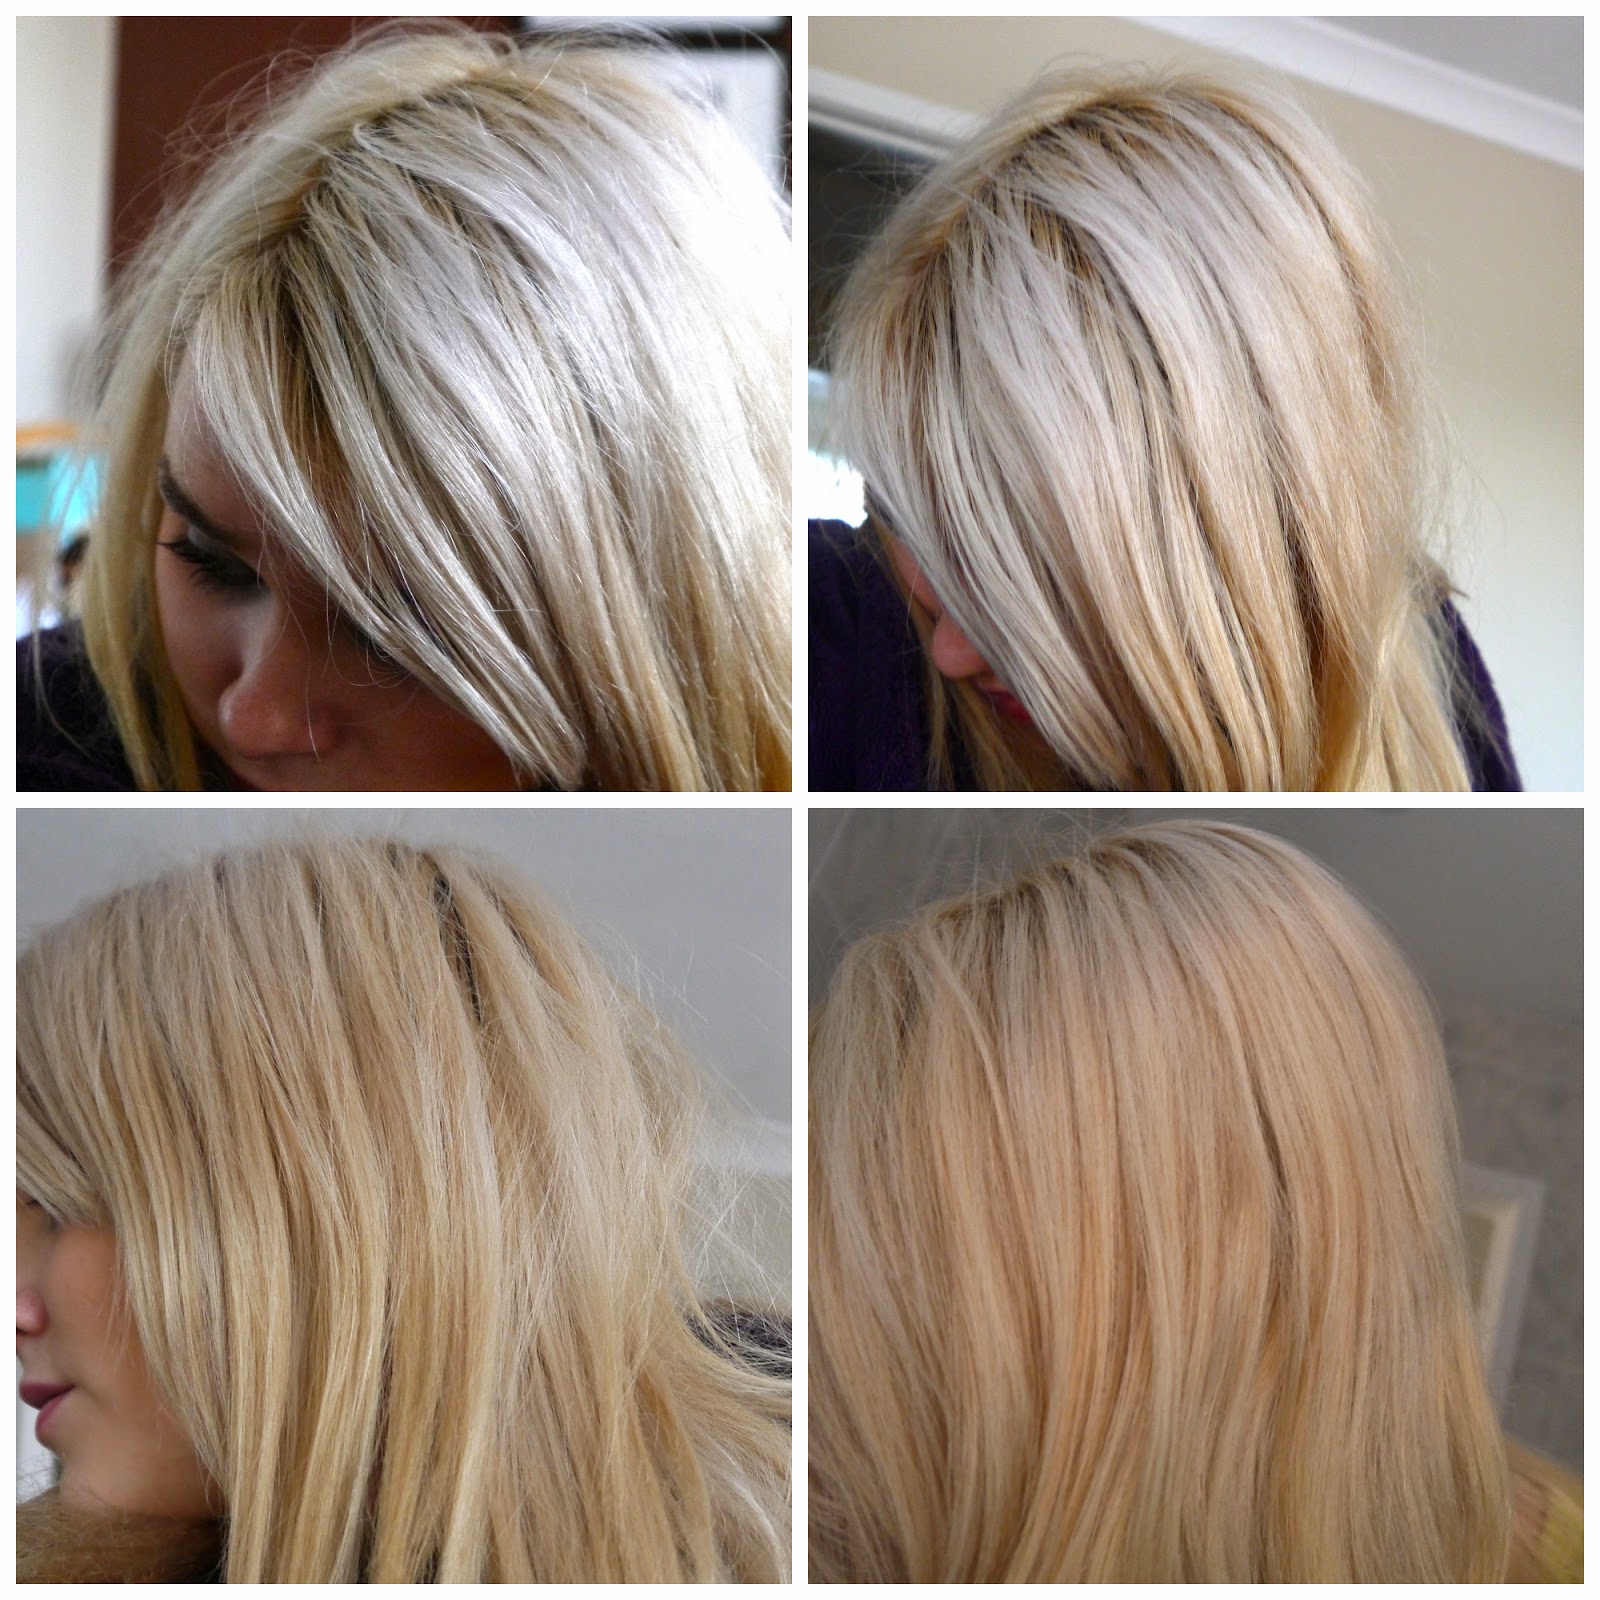 LIVE COLOUR XXL TONER MOUSSE FOR BLONDE HAIR BEFORE AFTER